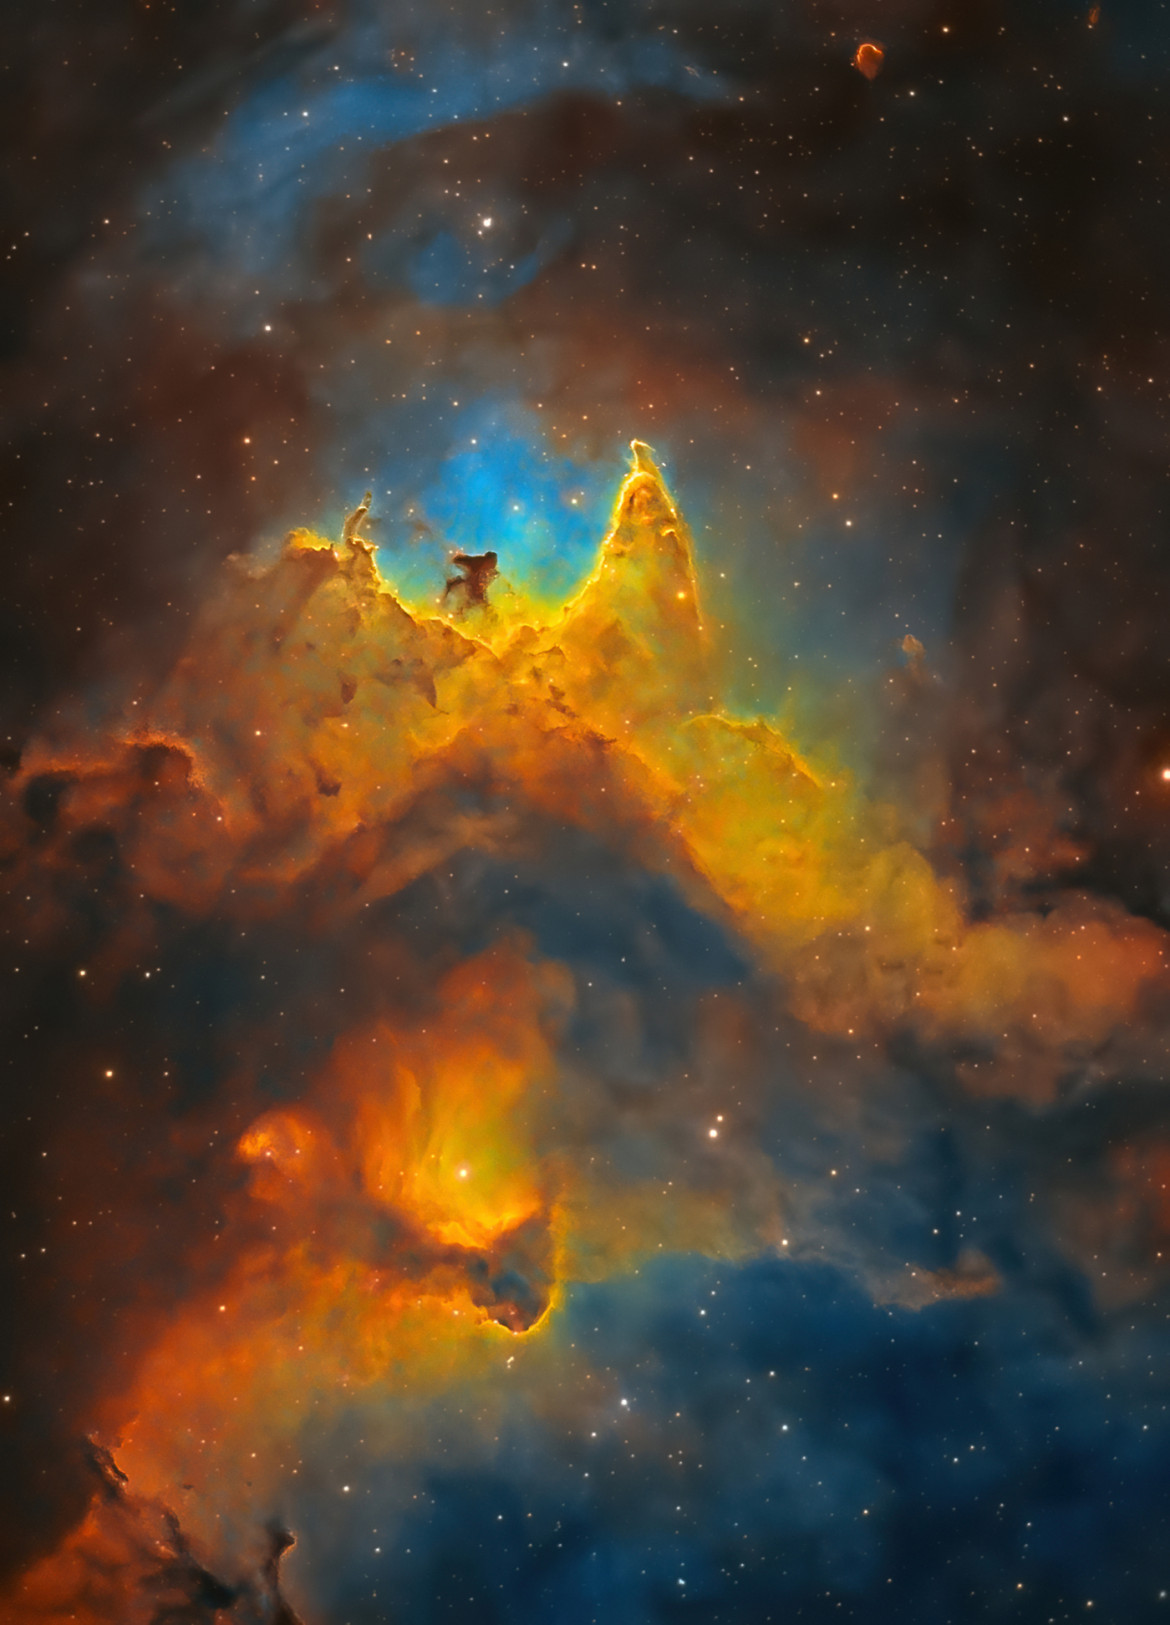 fot. Kush Chandari, "The Soul of Space (Close-up of the Soul Nebula)" / Astronomy Photographer of the Year 2021